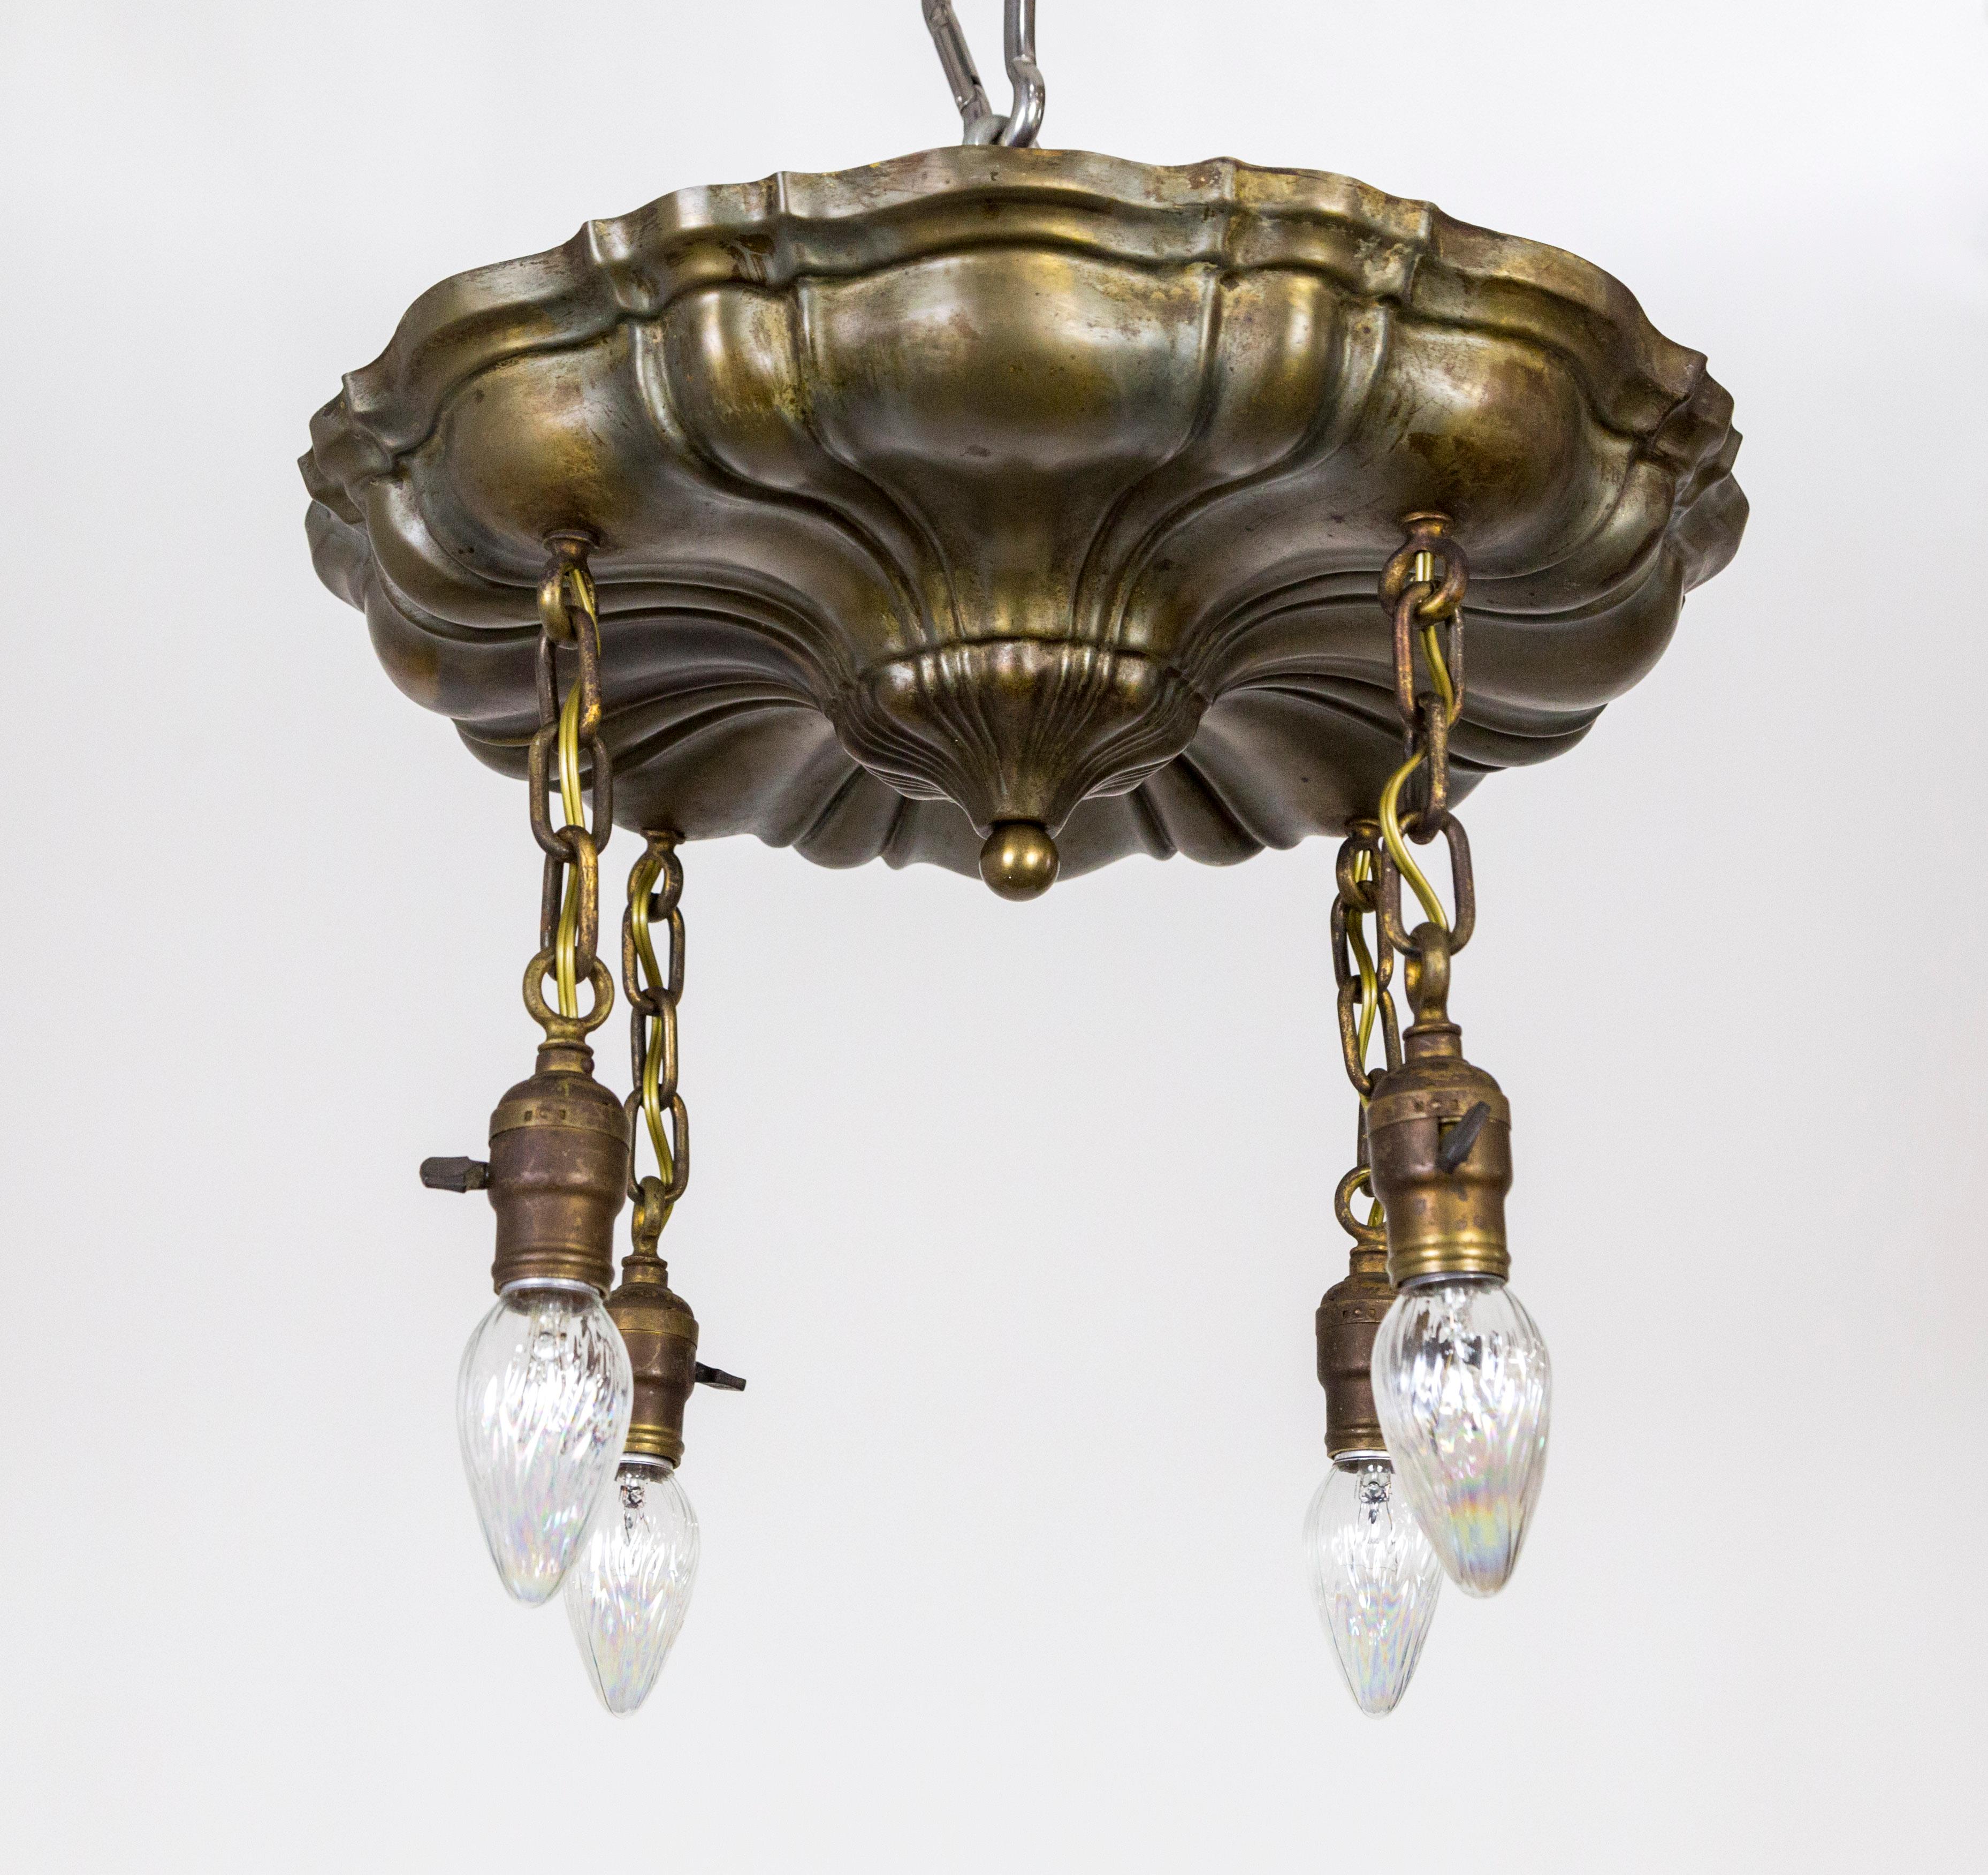 A period, Victorian, flush mount fixture with lovely lines in Sheffield style with refreshed patina. Has 4 hanging lights with switches on each socket. Newly wired. Measures: 11” height x 17” diameter.